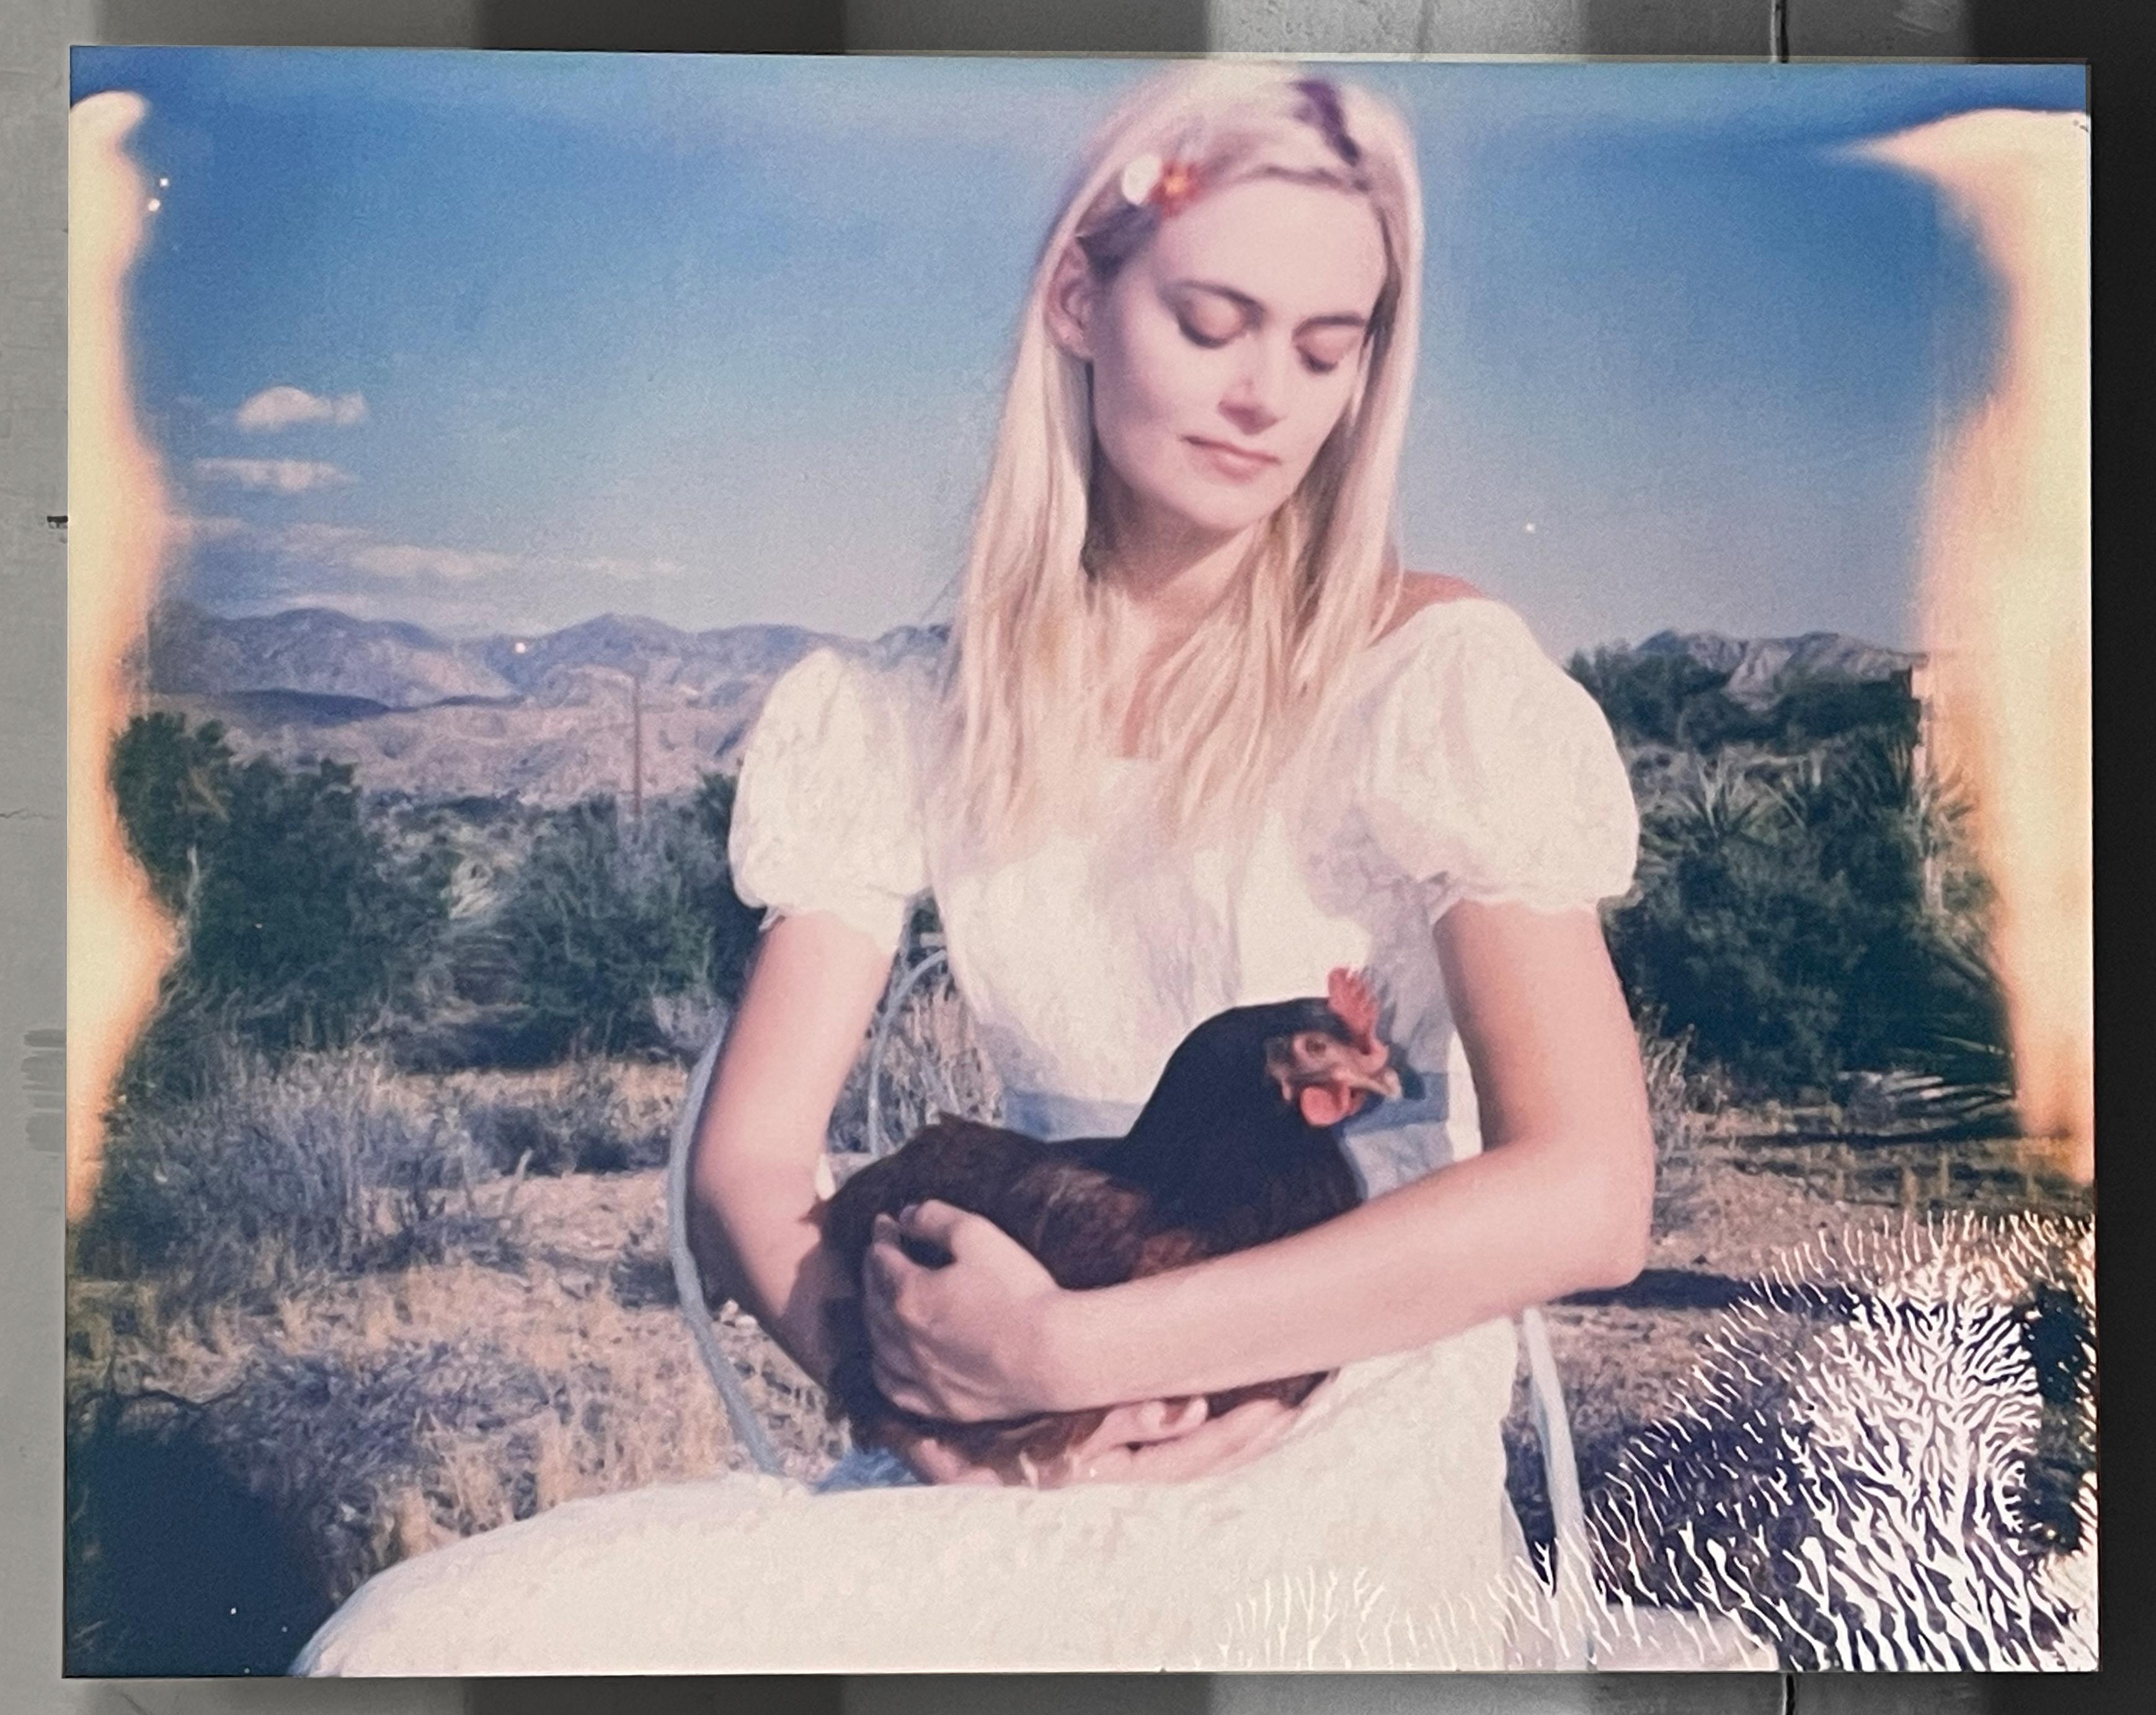 Chicken Madonna (Chicks and Chicks and sometimes Cocks) - 2016

30x37cm, 
Edition 1/10. 
Archival Print on Dibond, based on the Polaroid. 
Signed on back with Certificate. 
Artist Inventory No. 19520. 

LIFE’S A DREAM
(The Personal World of Stefanie